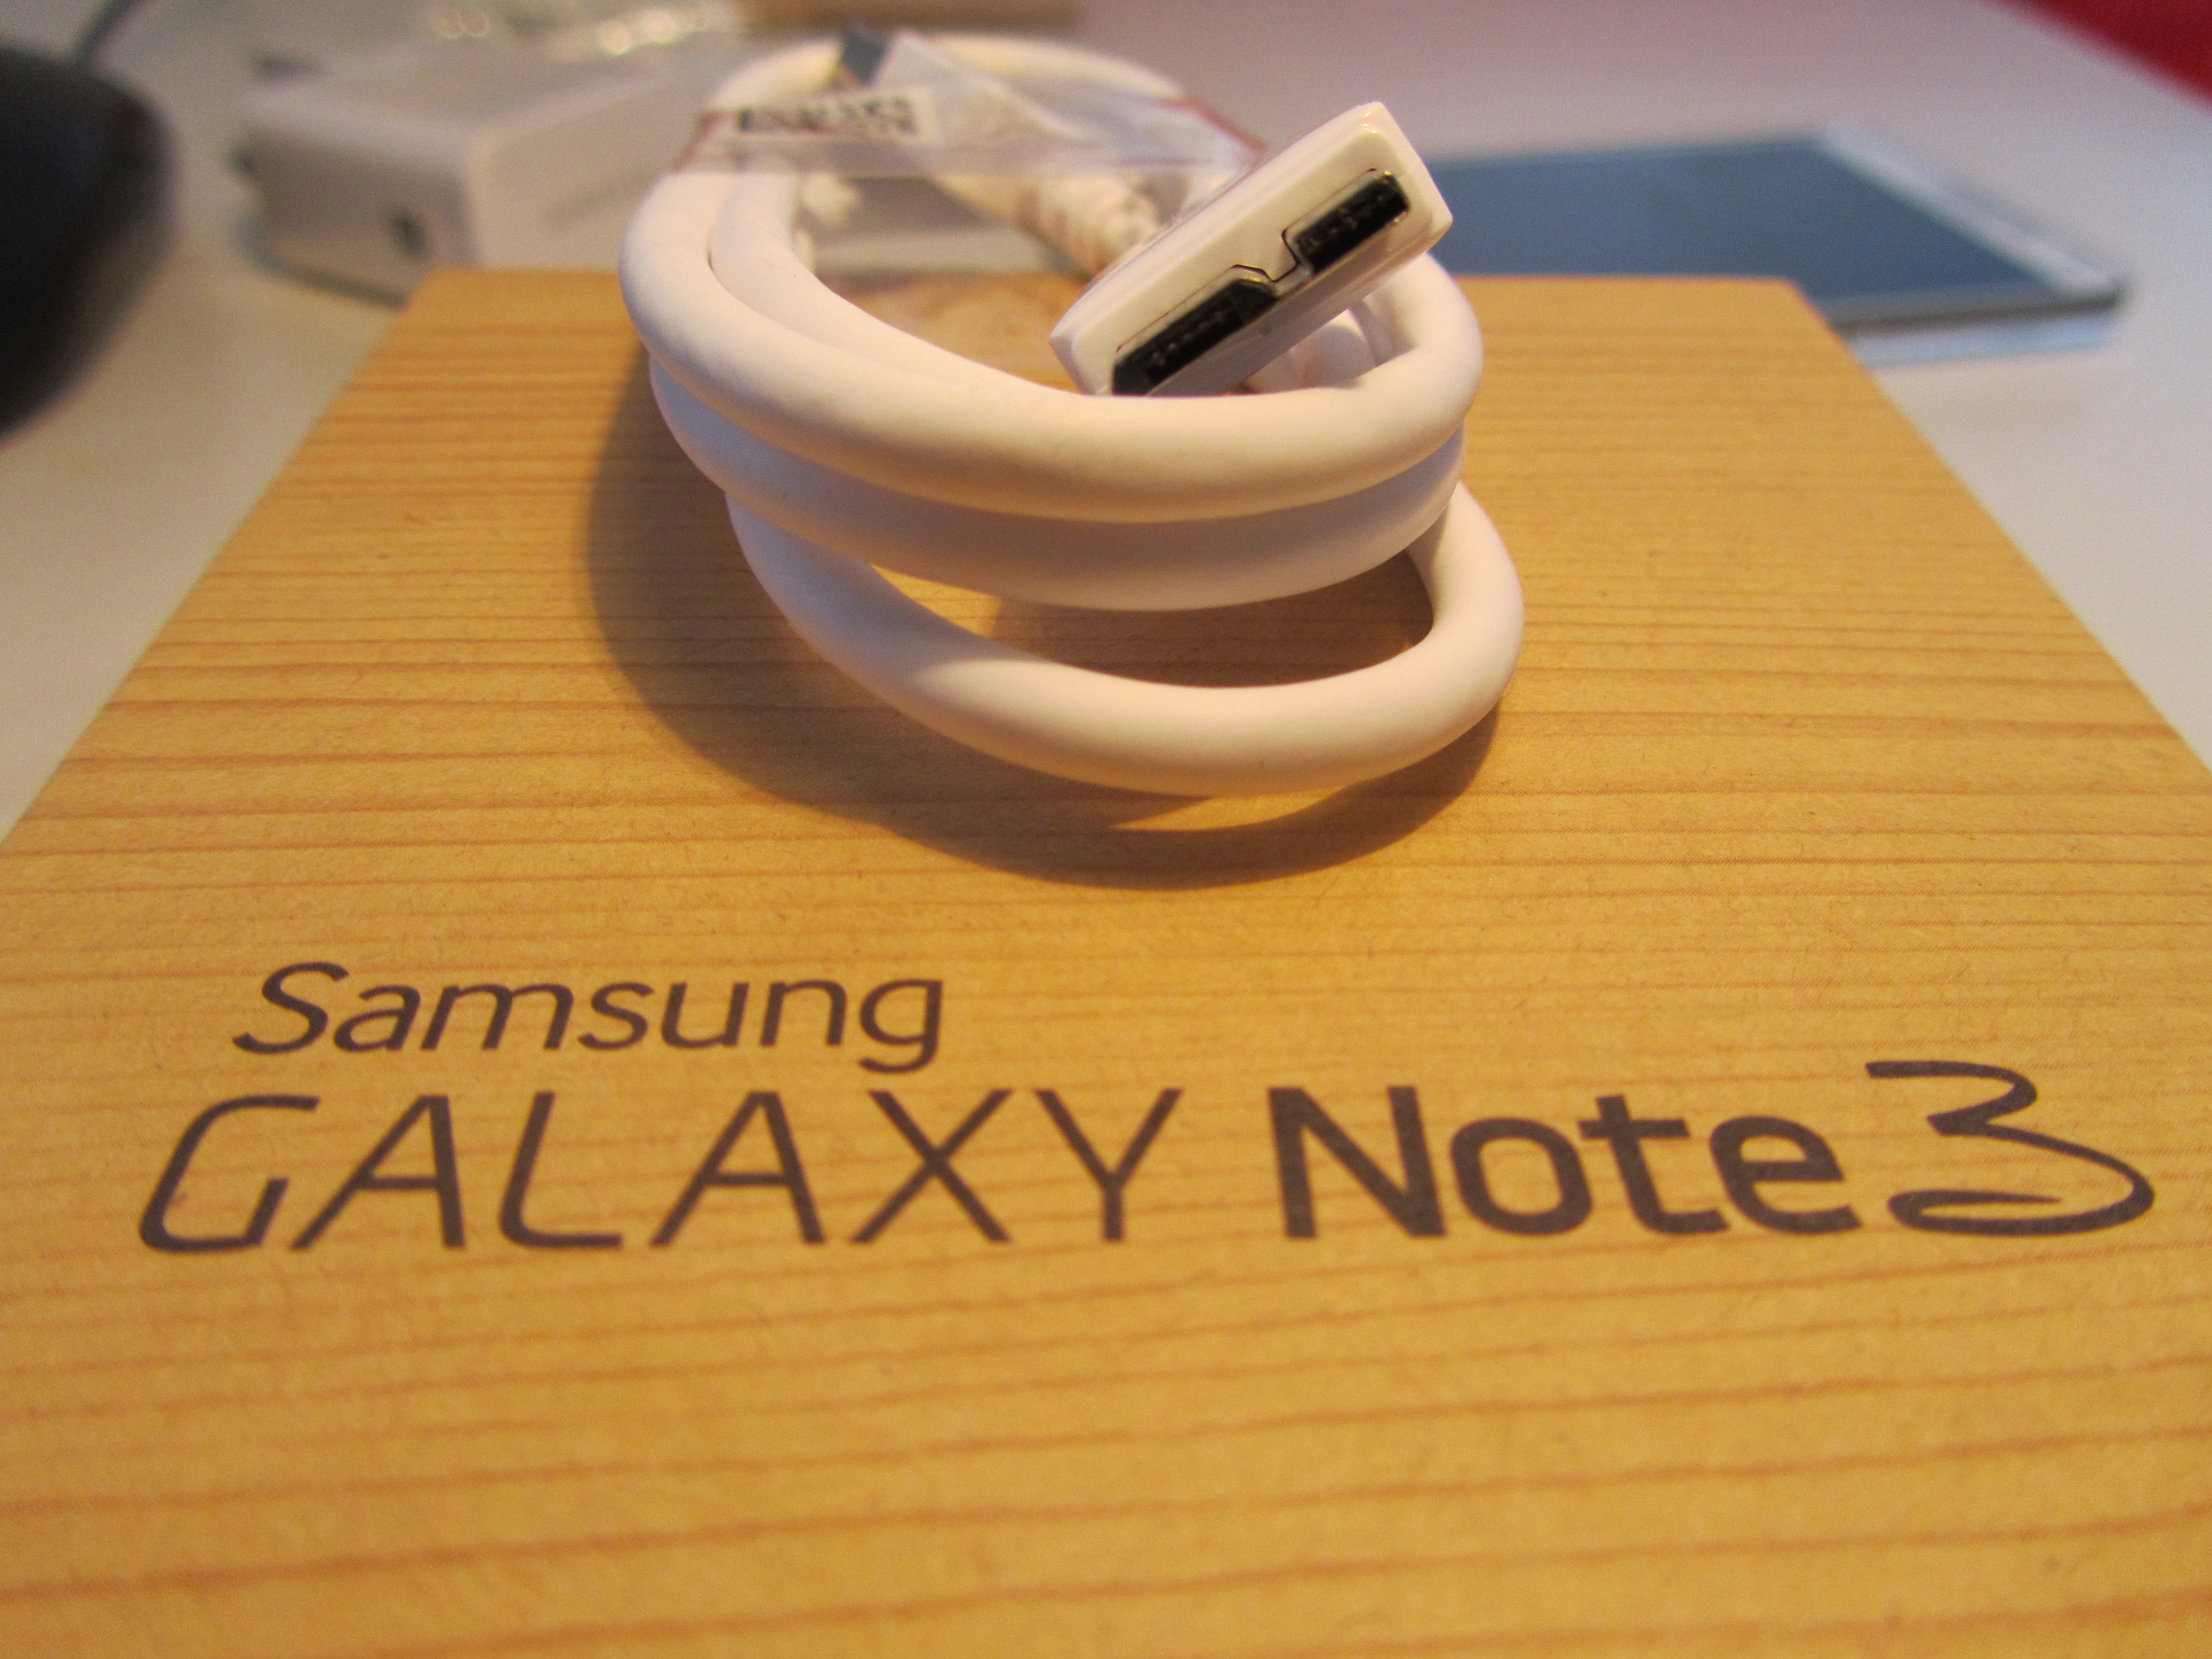 Note3 Charger Samsung Galaxy Note 3 review: One of the best Android handsets money can buy, if you can hold it